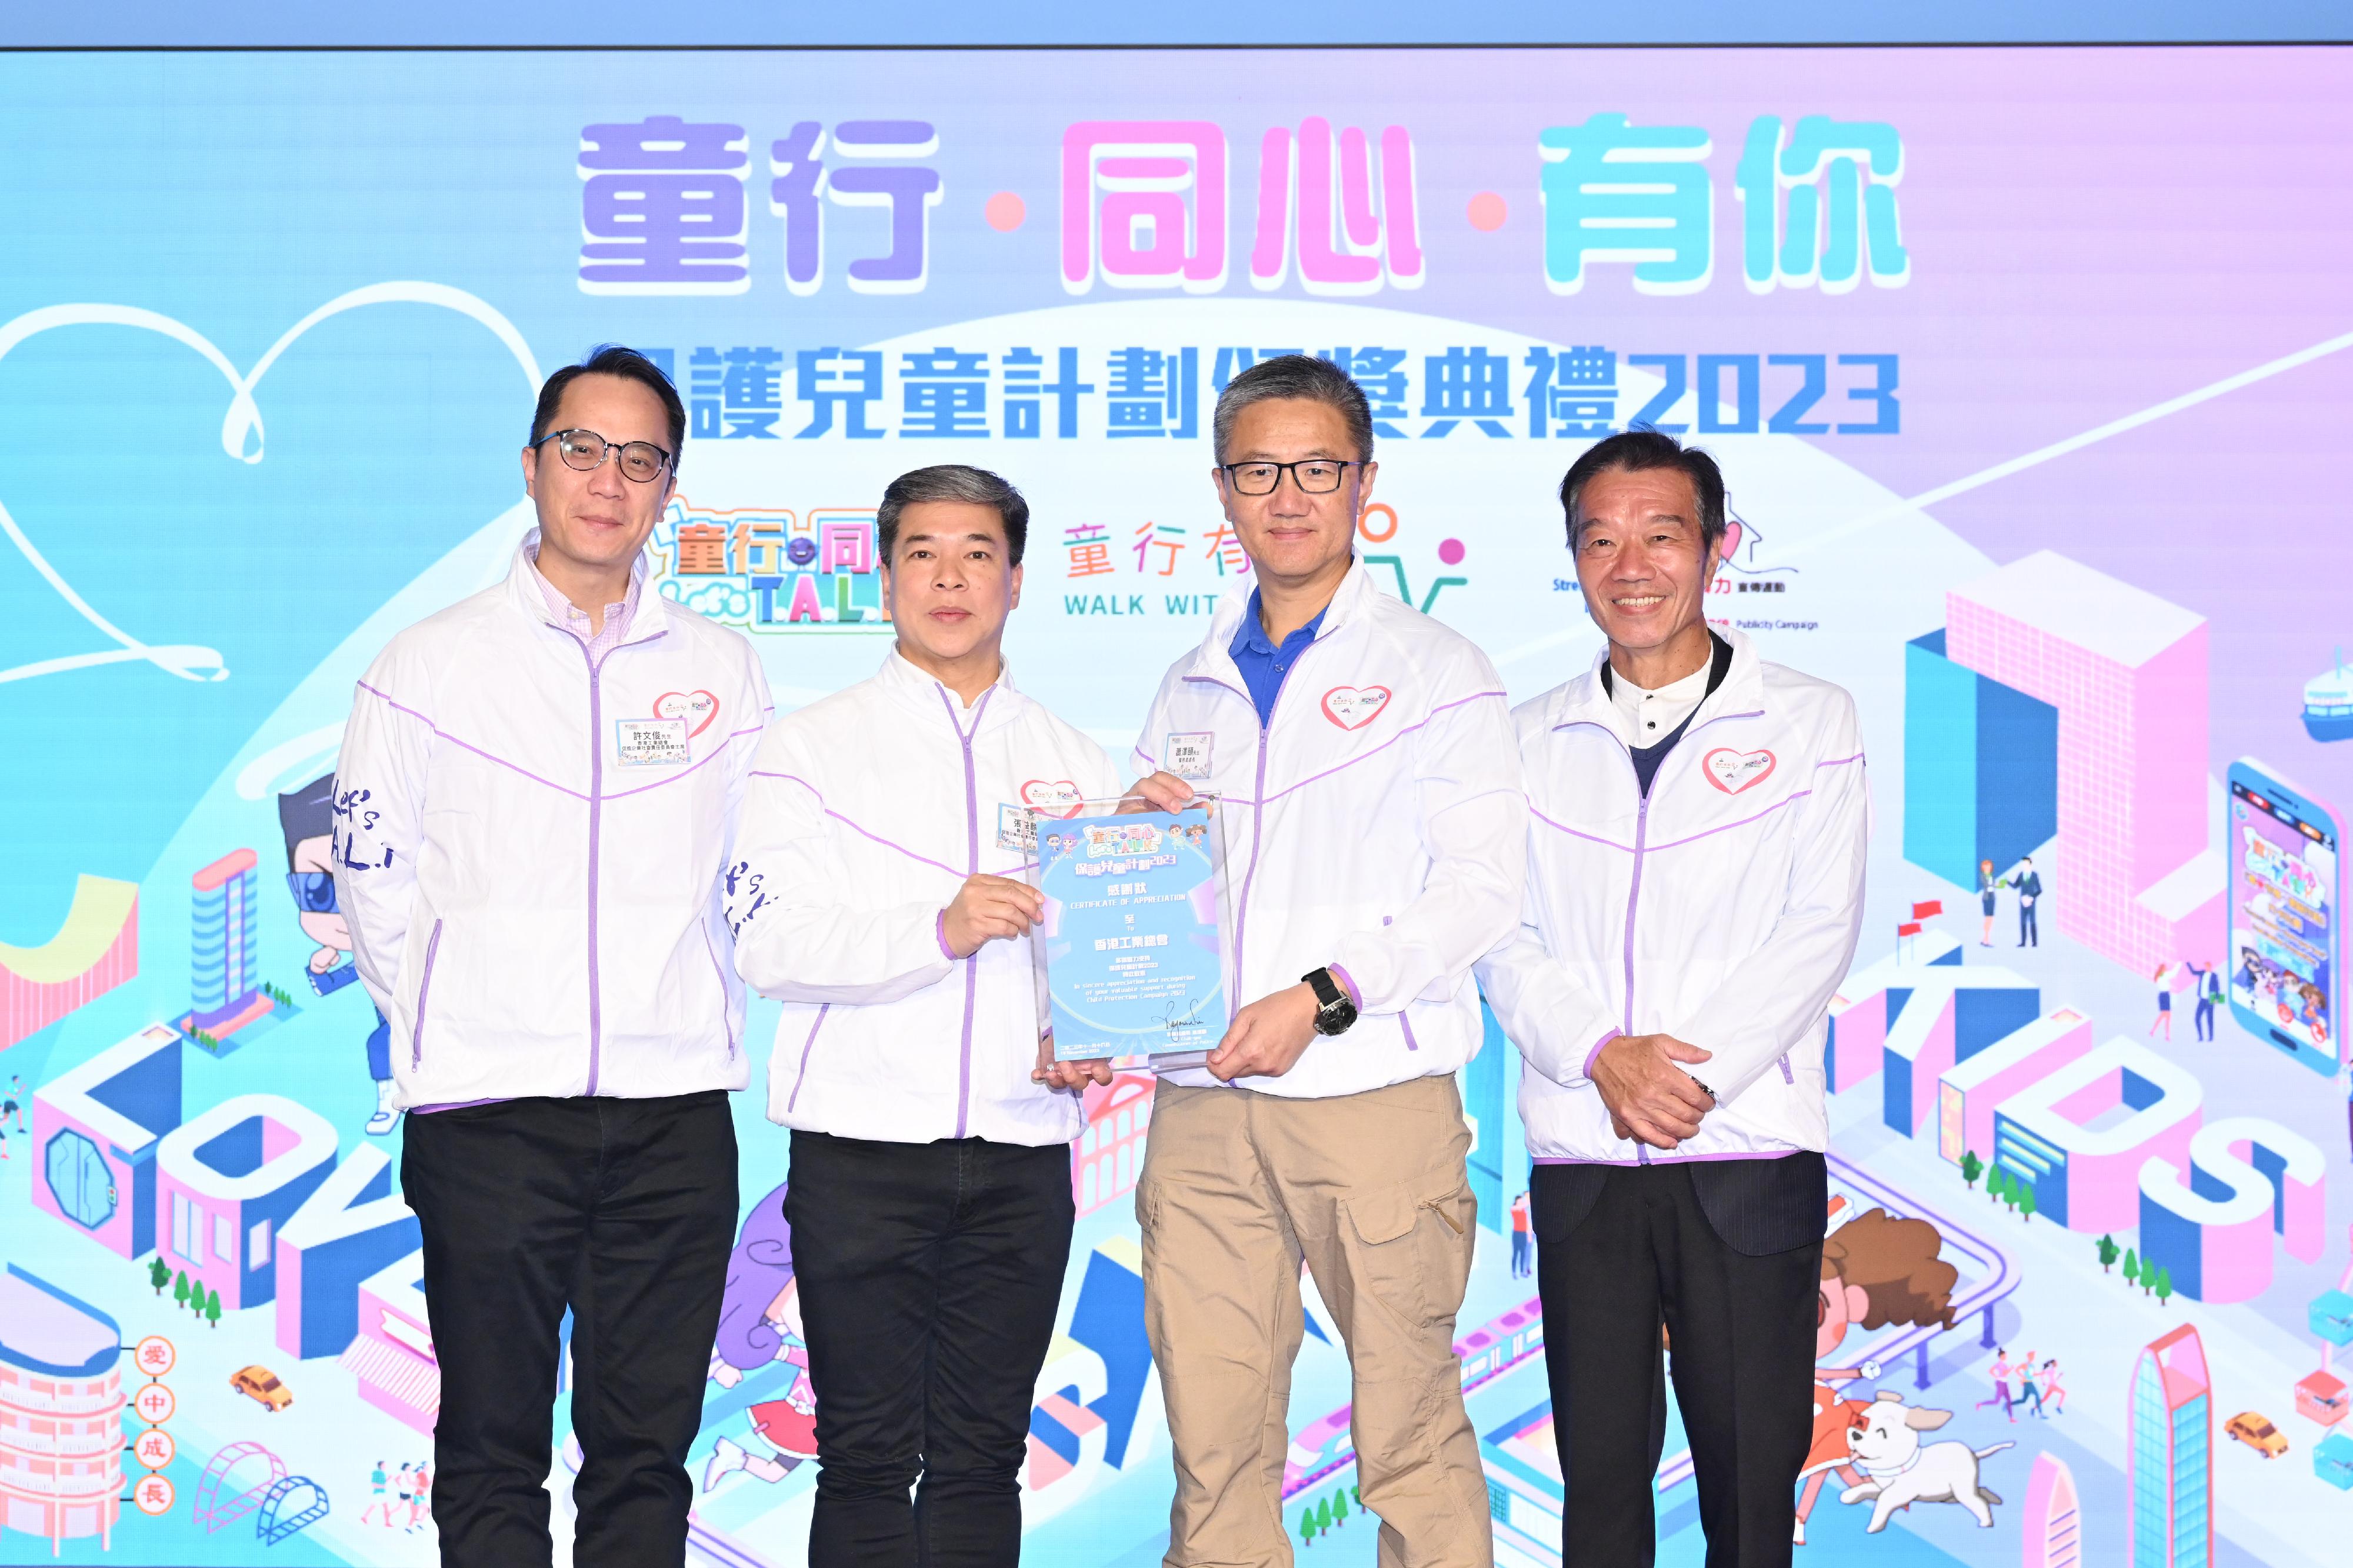 The Chief Secretary for Administration and Chairperson of the Commission on Children, Mr Chan Kwok-ki, today (November 18) officiated at the "Let's T.A.L.K. and Walk with Kids" Child Protection Campaign Award Presentation Ceremony 2023. Photo shows the Commissioner of Police, Mr Siu Chak-yee (second right), presenting a souvenir to representatives of a supporting organisation of the Child Protection Campaign.